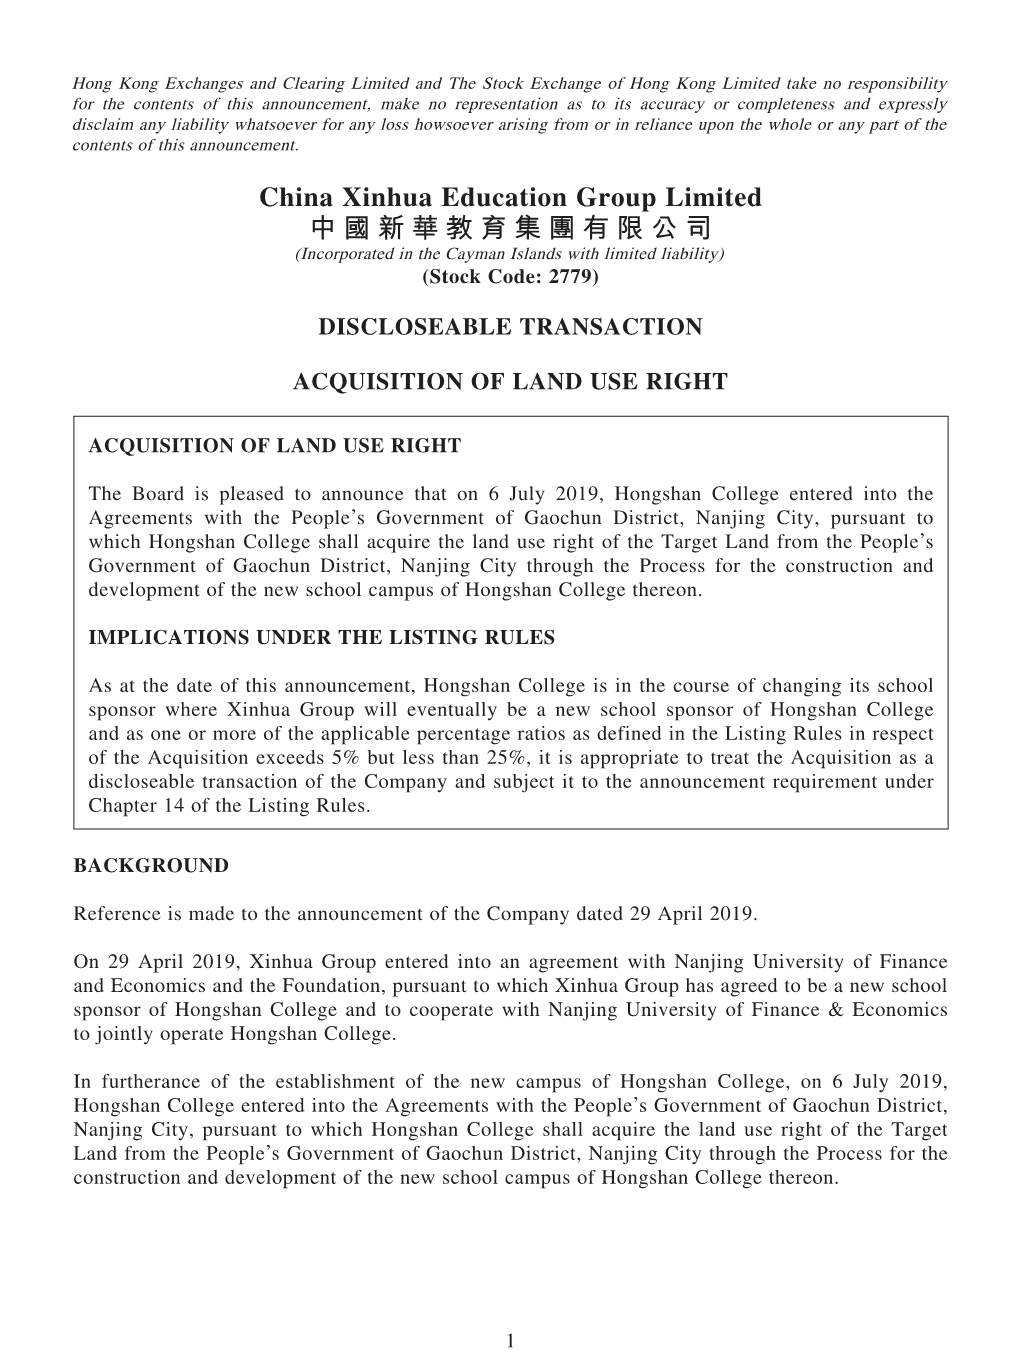 China Xinhua Education Group Limited 中國新華教育集團有限公司 (Incorporated in the Cayman Islands with Limited Liability) (Stock Code: 2779)